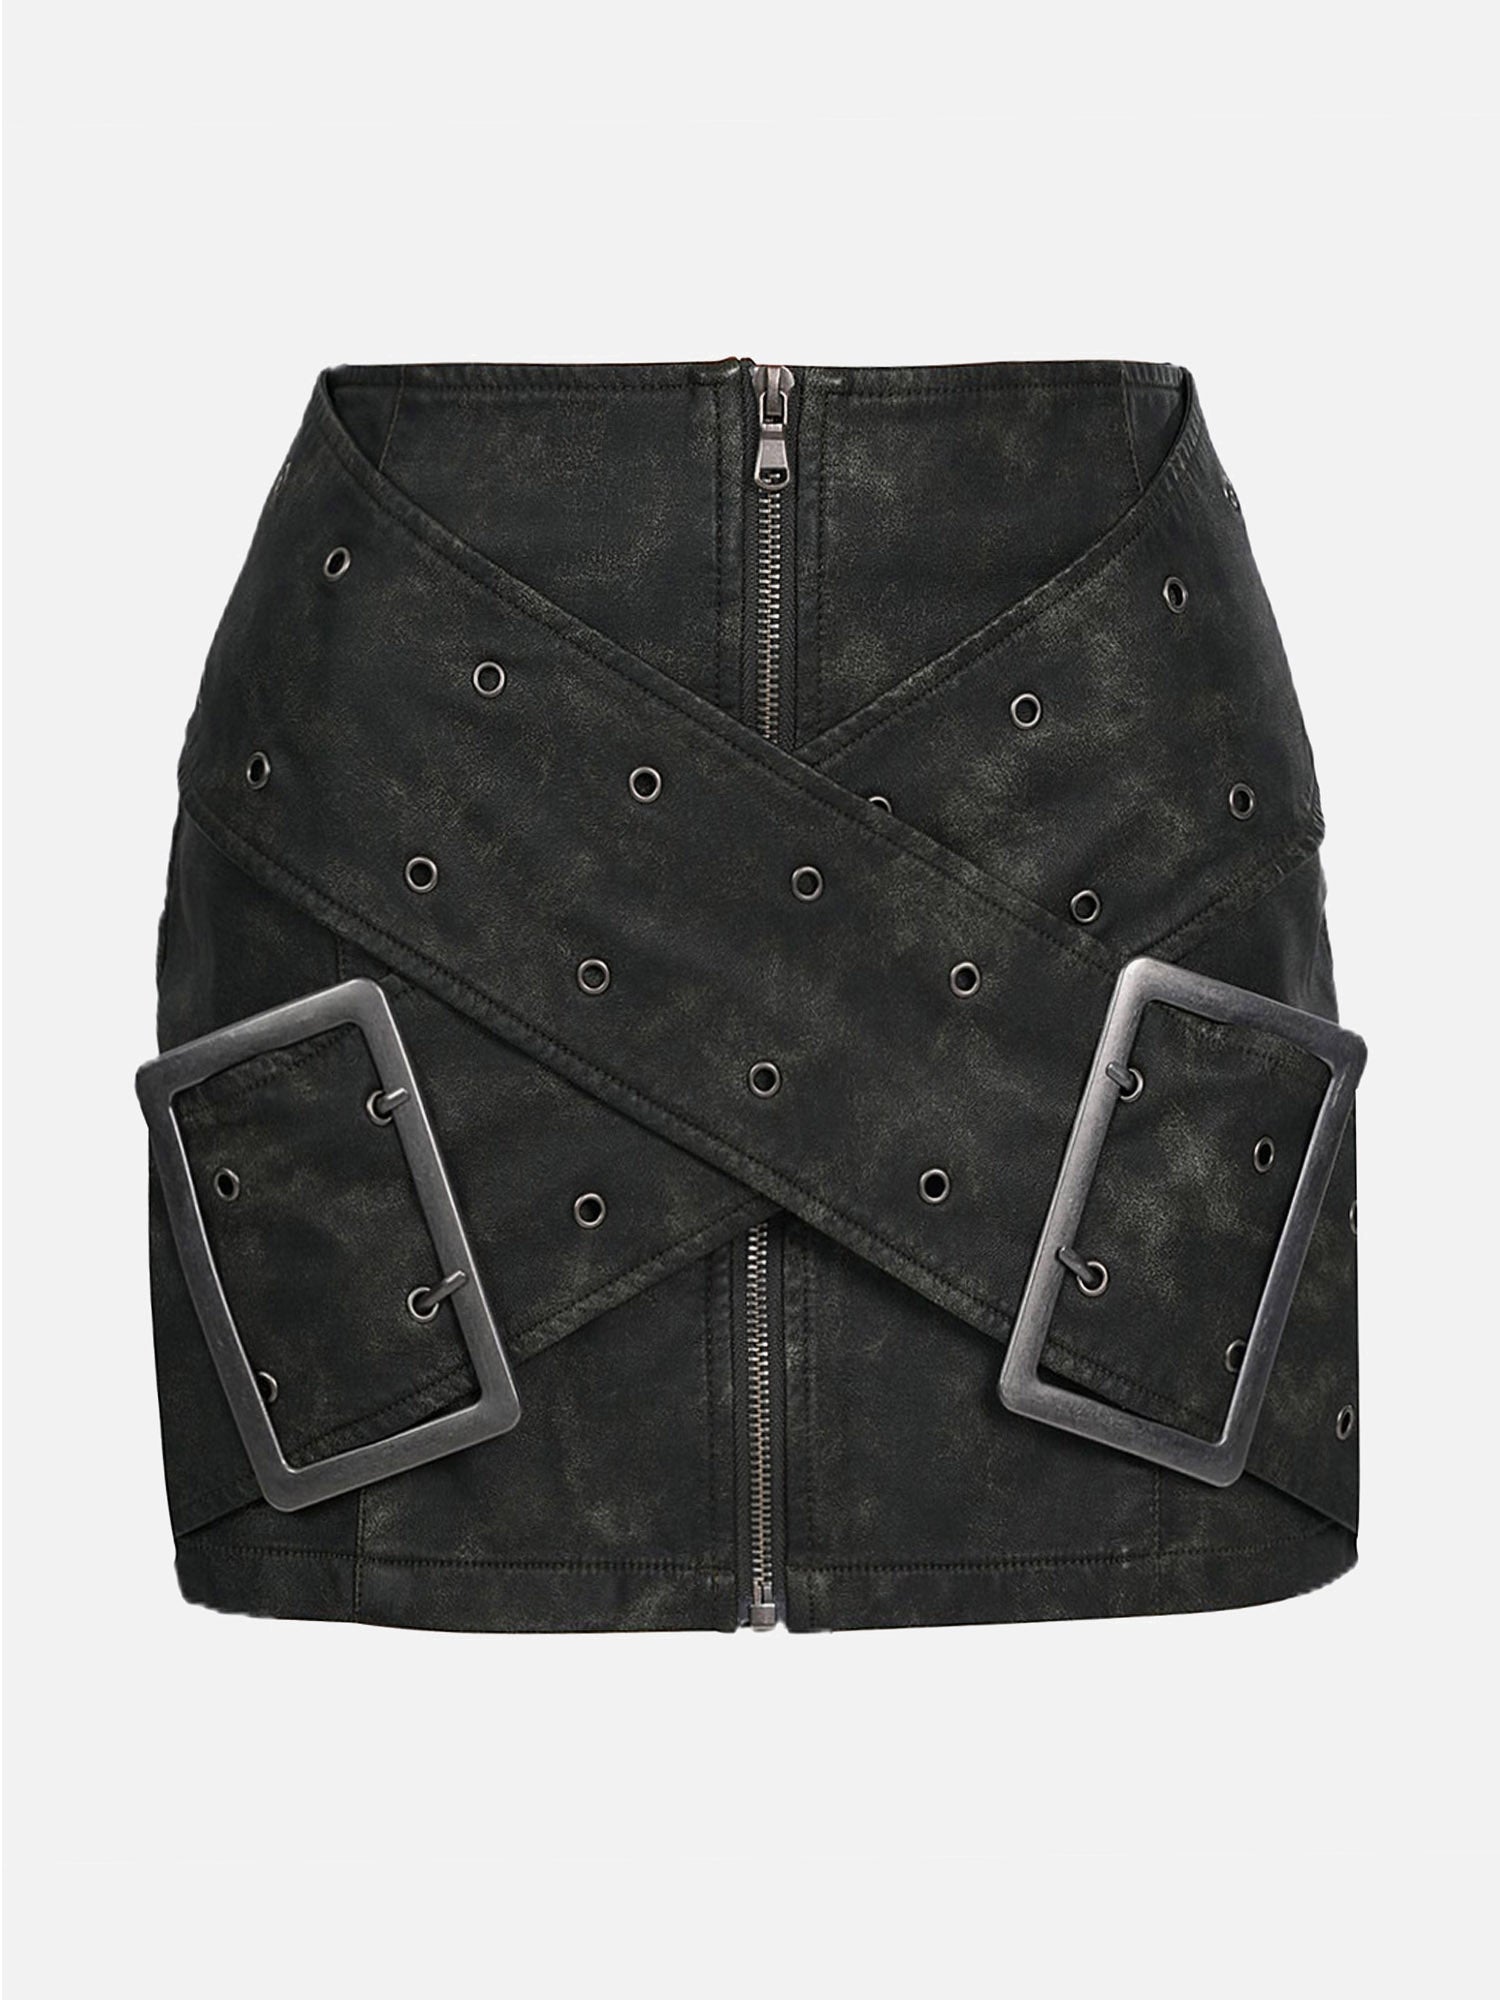 Thesupermade Retro Metal Buckle Cross Washed Leather Skirt